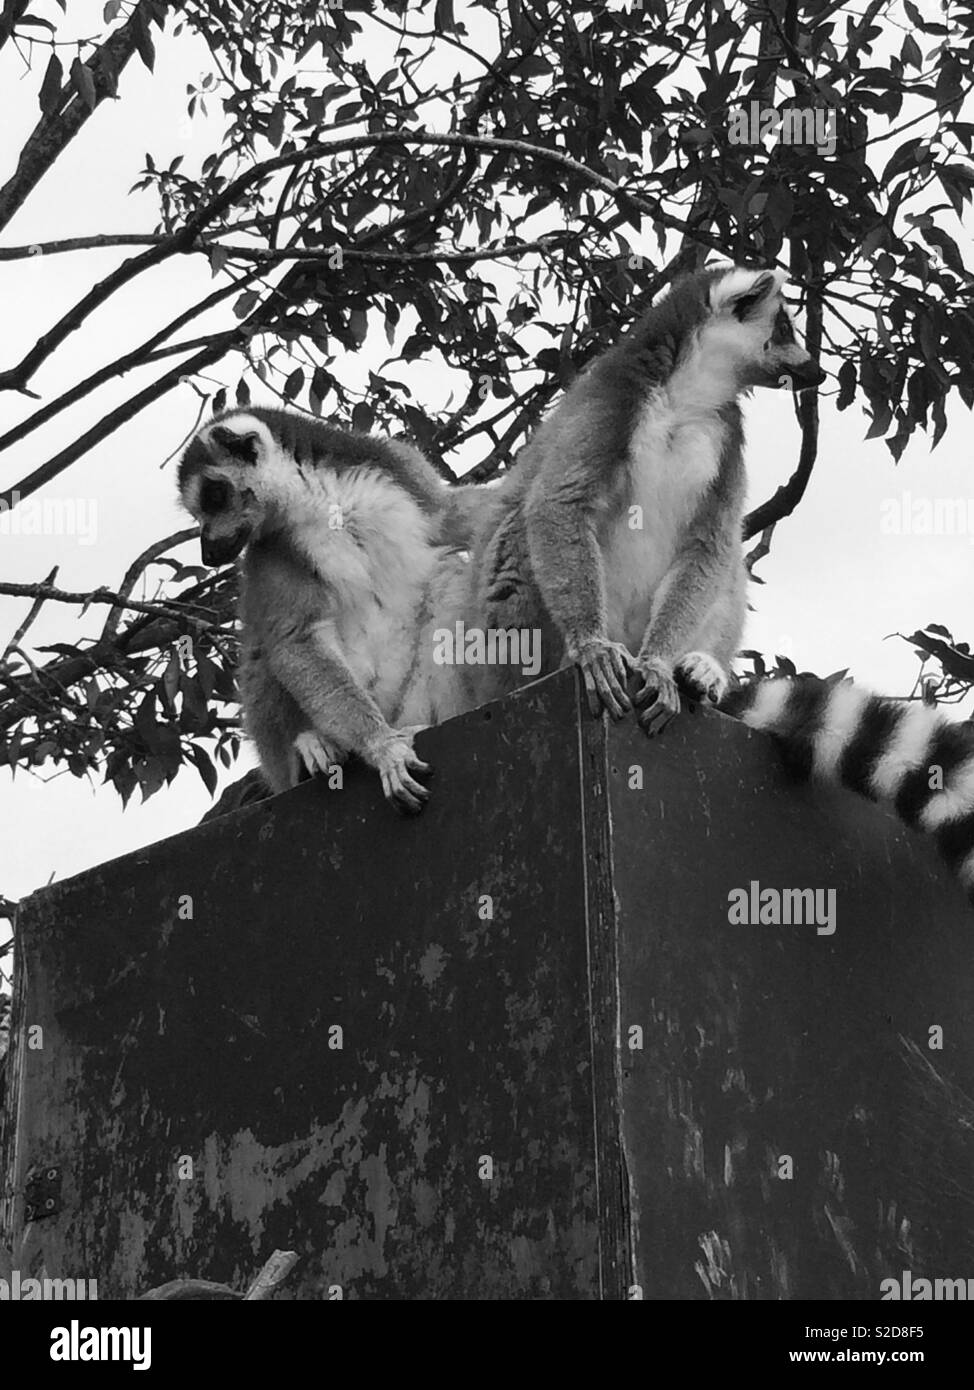 Two ring tailed lemurs in black and white Stock Photo